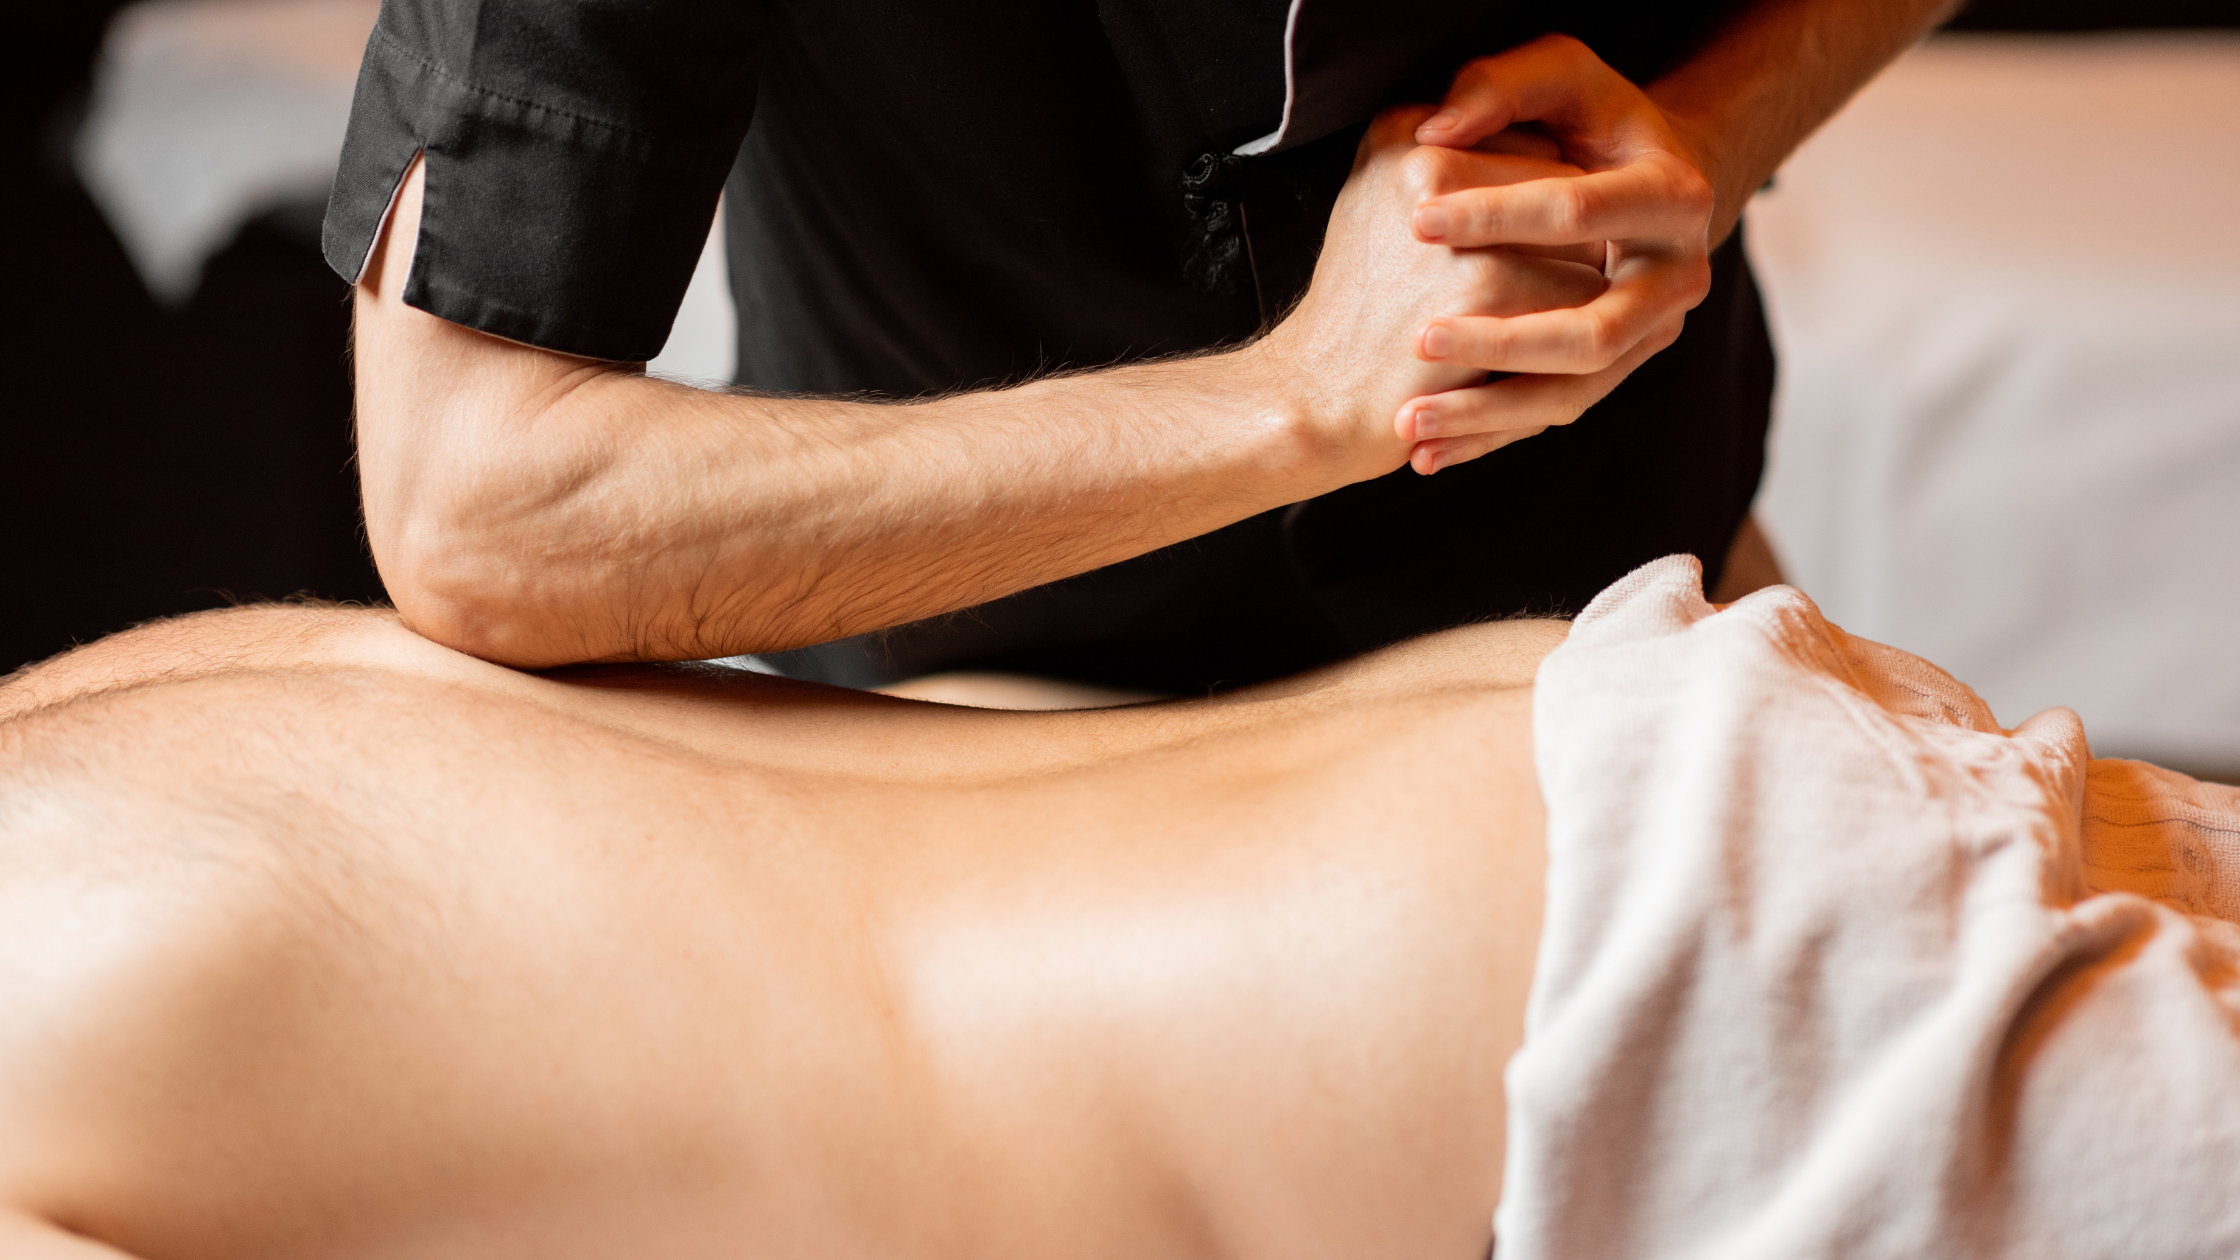 A person lying on a massage table, receiving a deep tissue massage on their back. The massage therapist is using their elbow to apply firm pressure to the muscles.